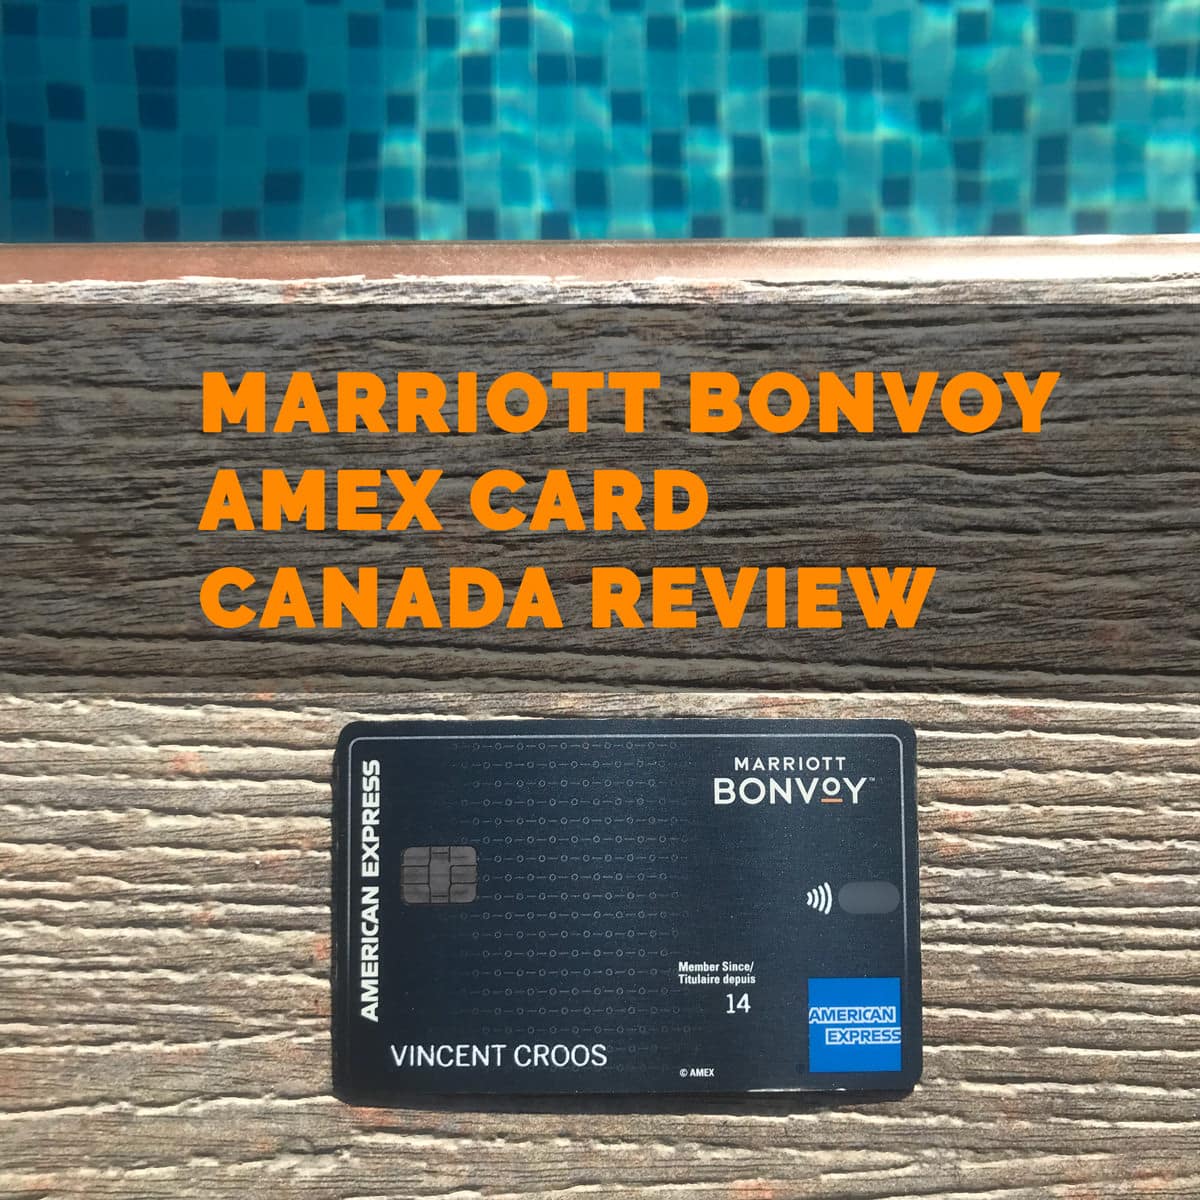 Marriott Bonvoy AMEX Card Canada Review – 6 Ways to Earn Points Faster